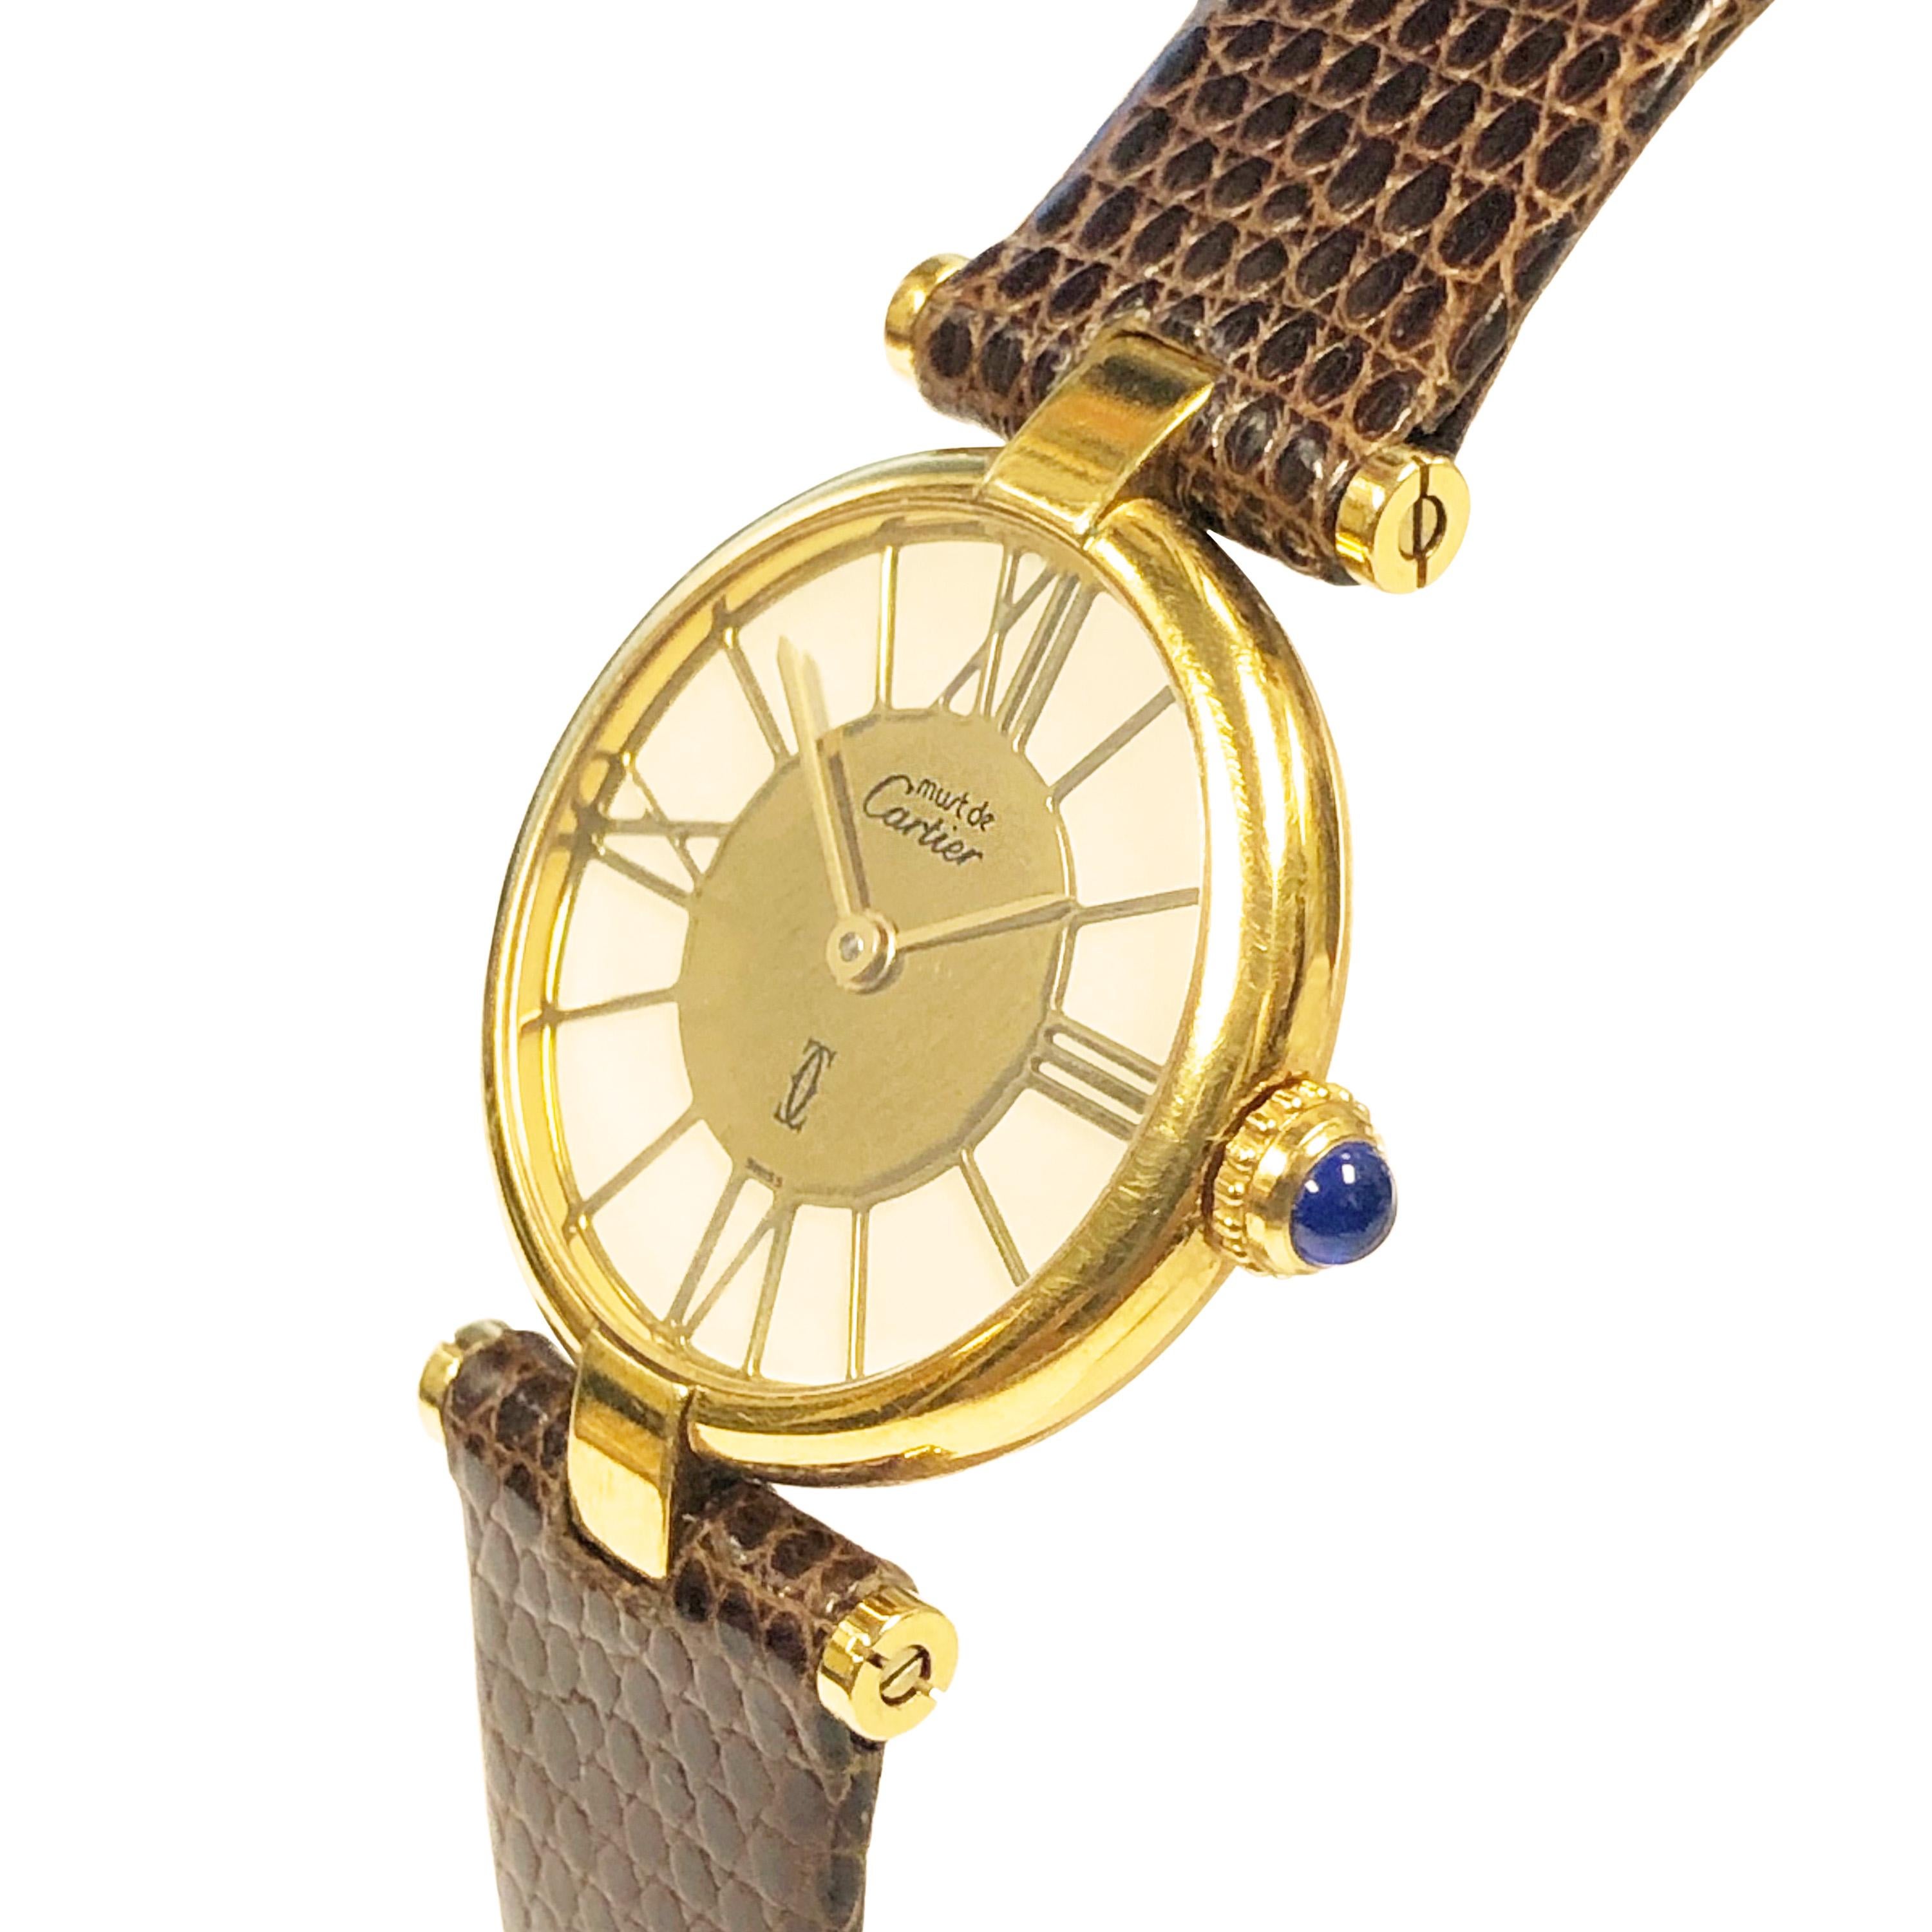 Circa 2000 Cartier ladies Must De Cartier Vendome Wrist watch, 24 MM Vermeil  ( Gold Plate on Sterling Silver ) case. Quartz Movement, White Dial with Gold Roman Numerals and a Sapphire crown. New Brown Lizard Strap with Gold Plated Cartier Tang